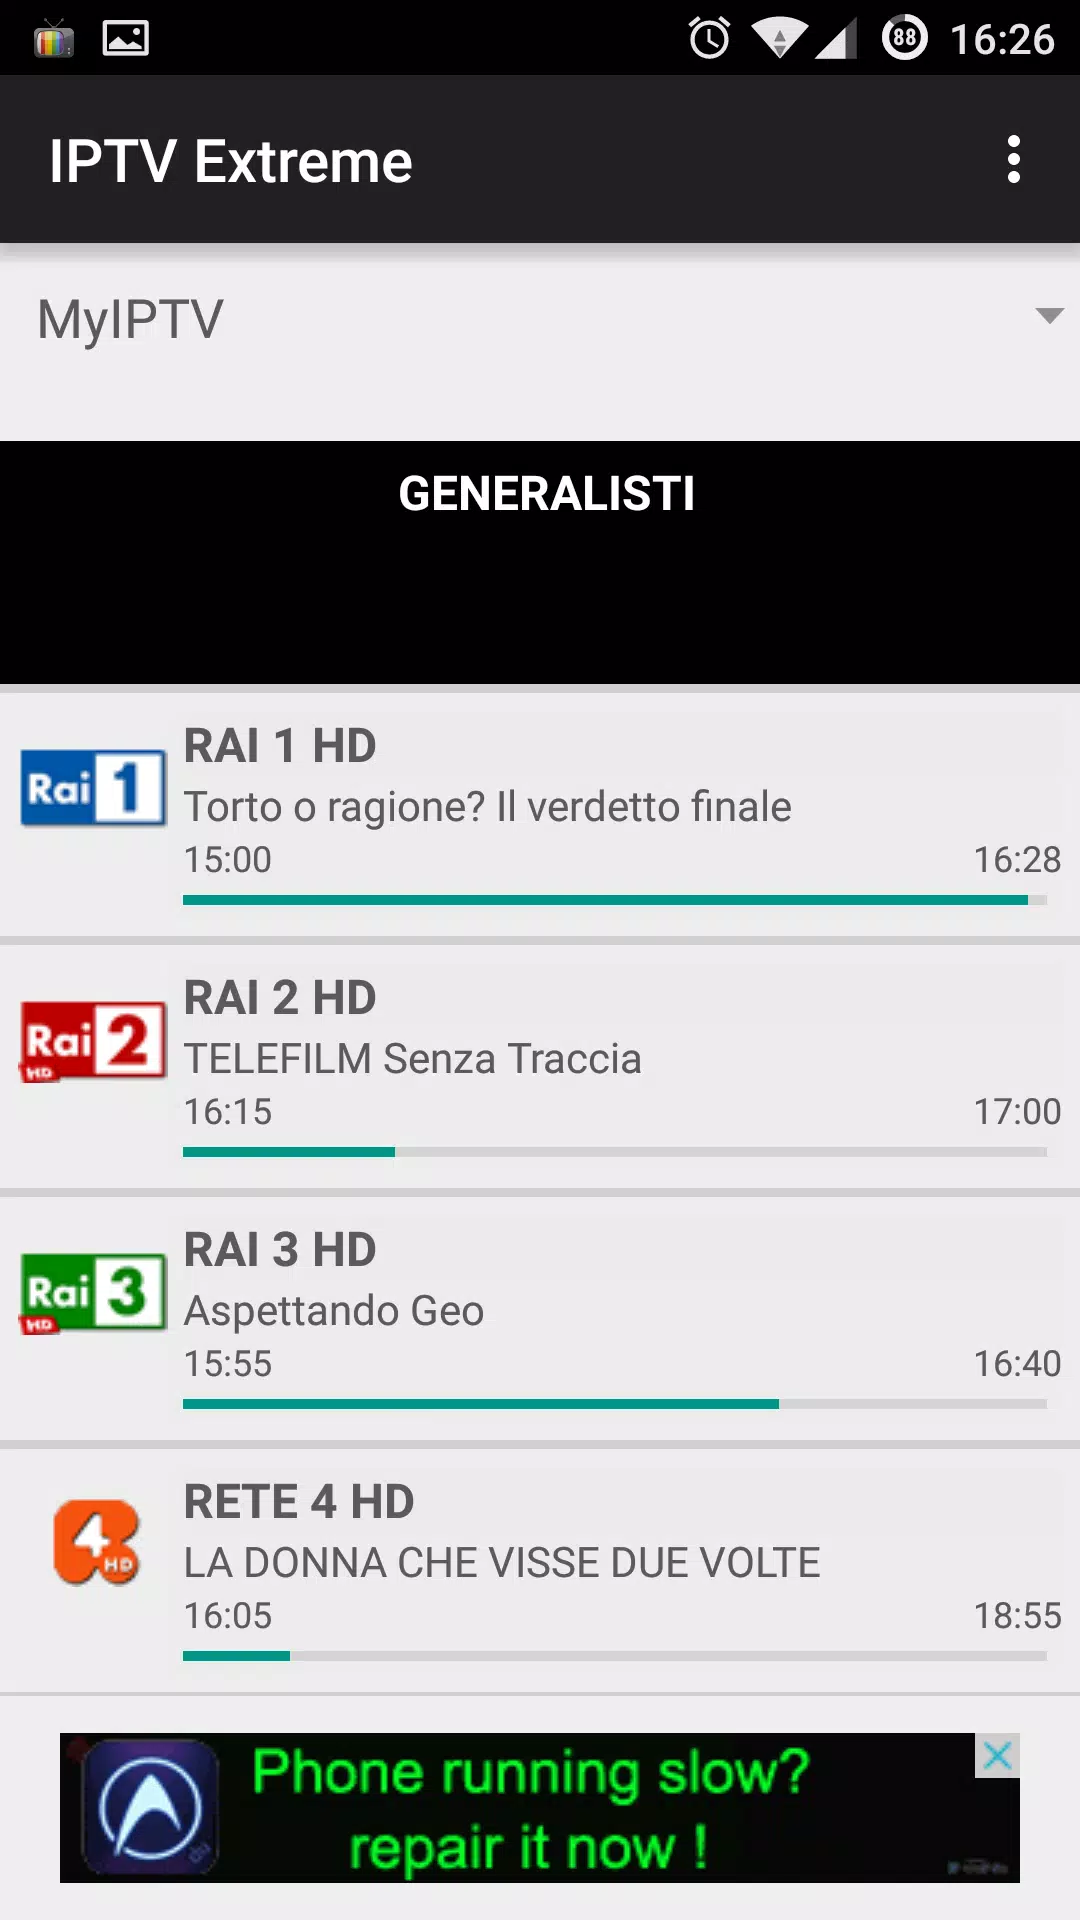 IPTV Extreme for Android - APK Download